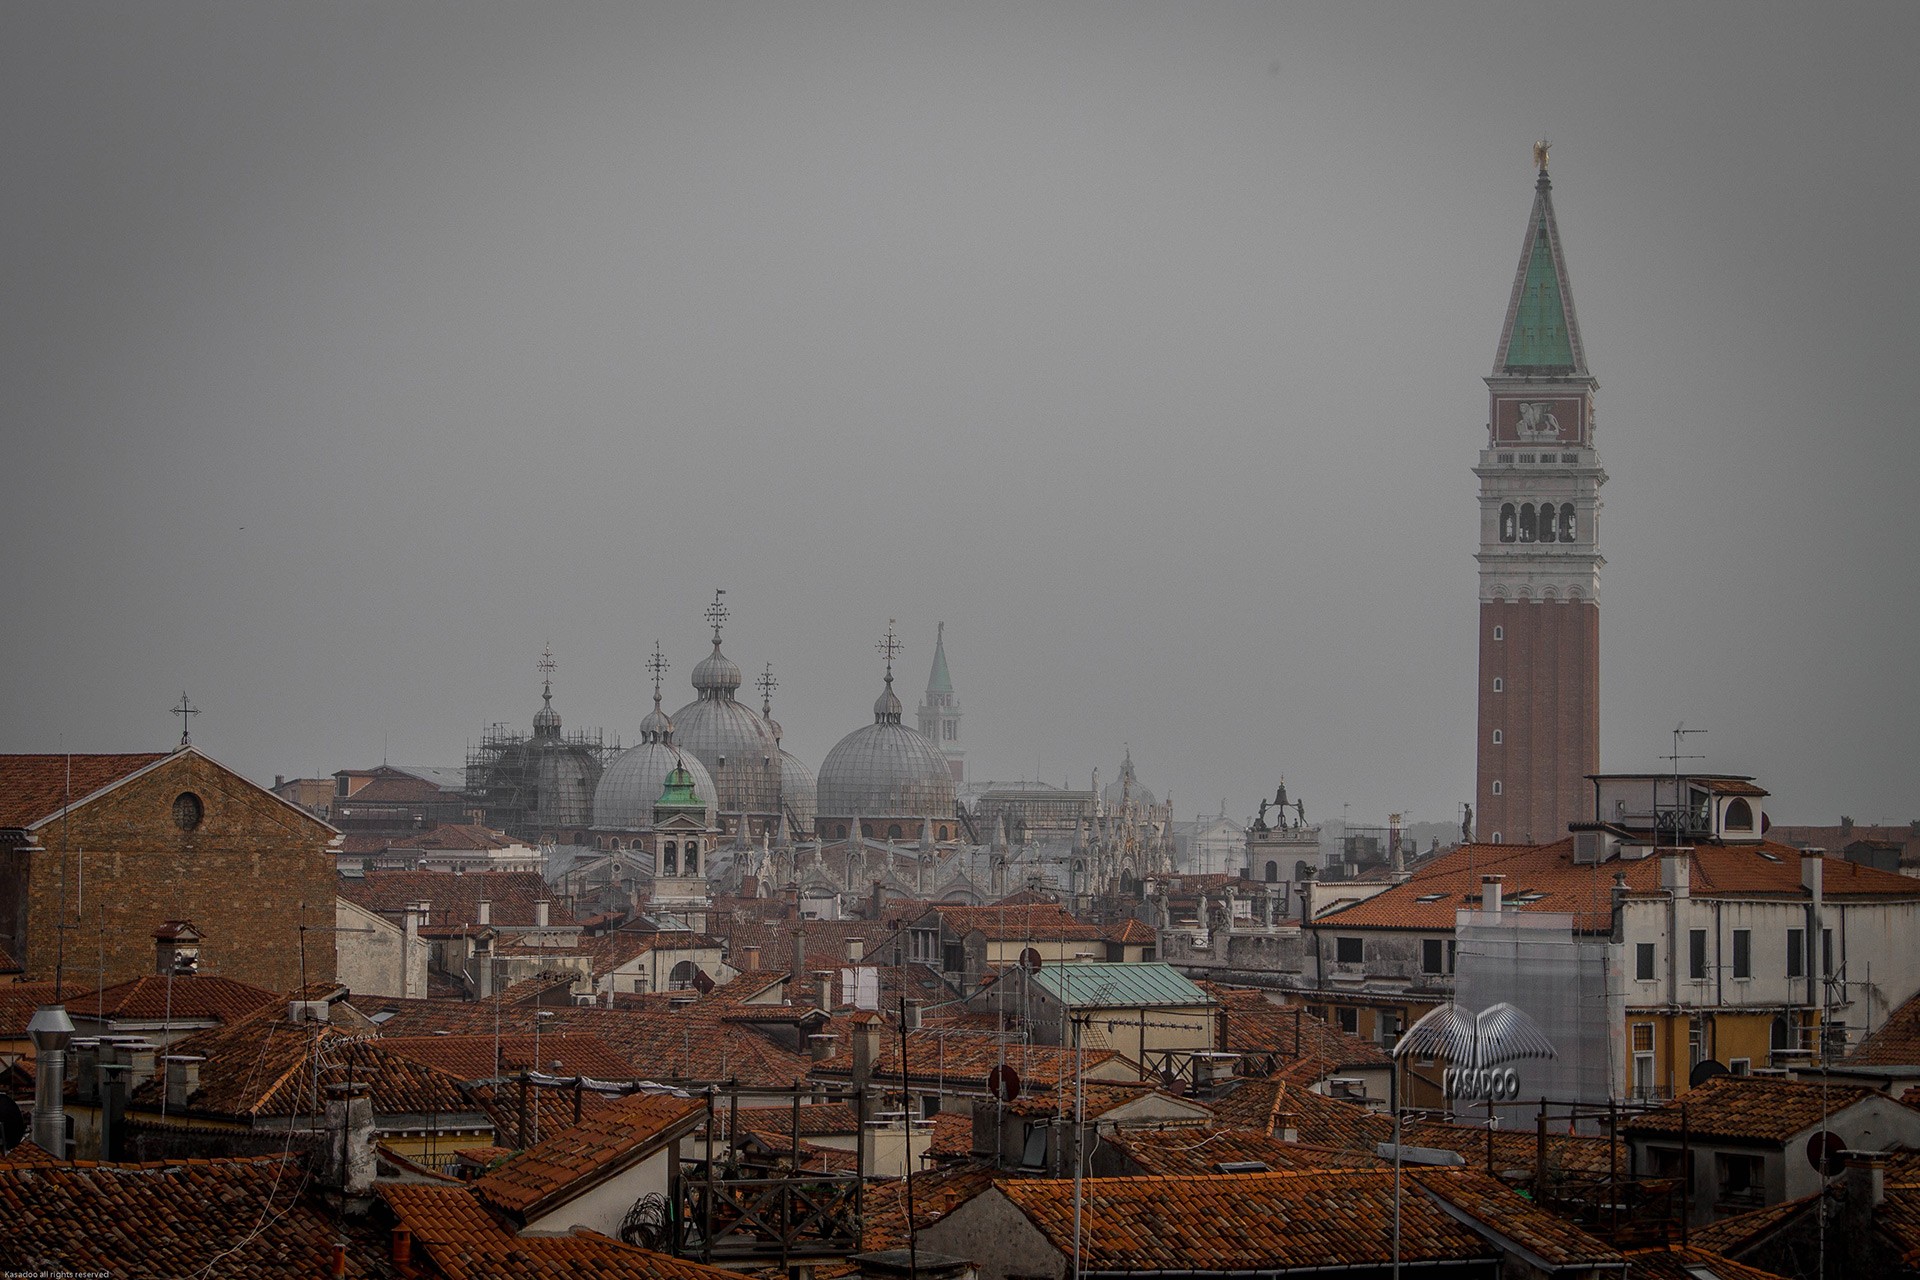 Rooftops of St Mark’s Basilica and the Bell Tower